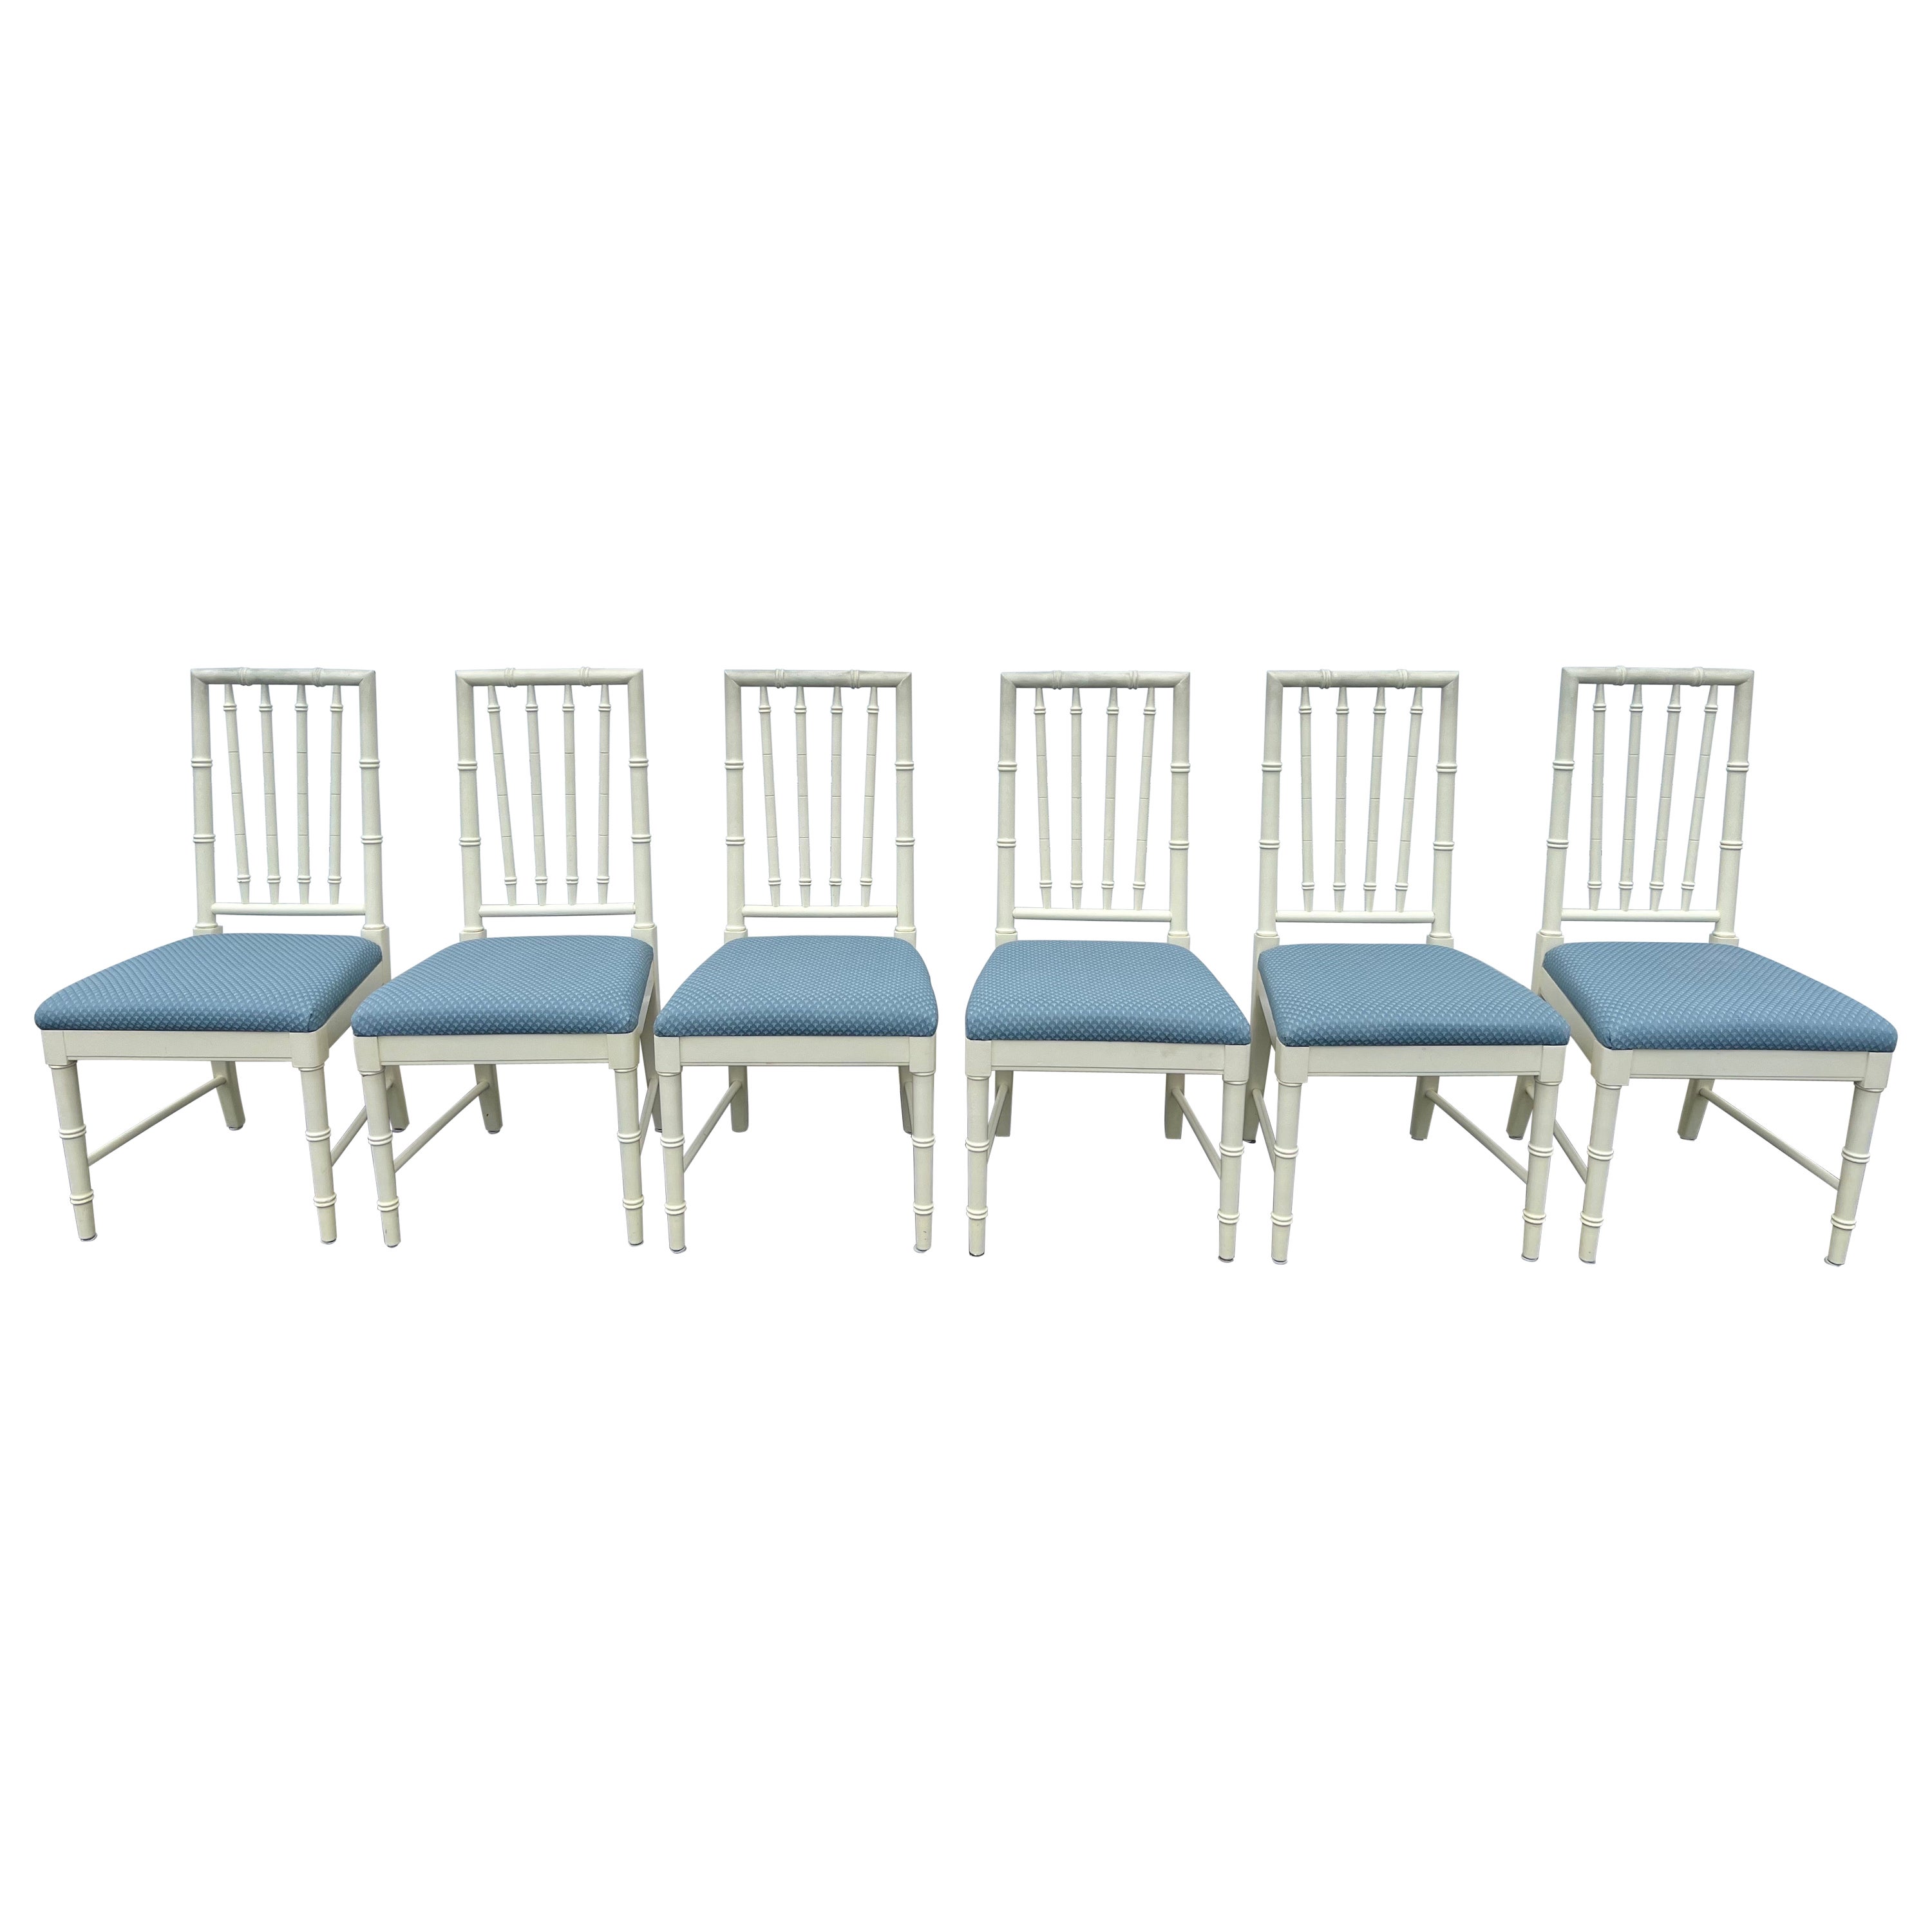 Set of Six Thomasville Faux Bamboo Dining Chairs 